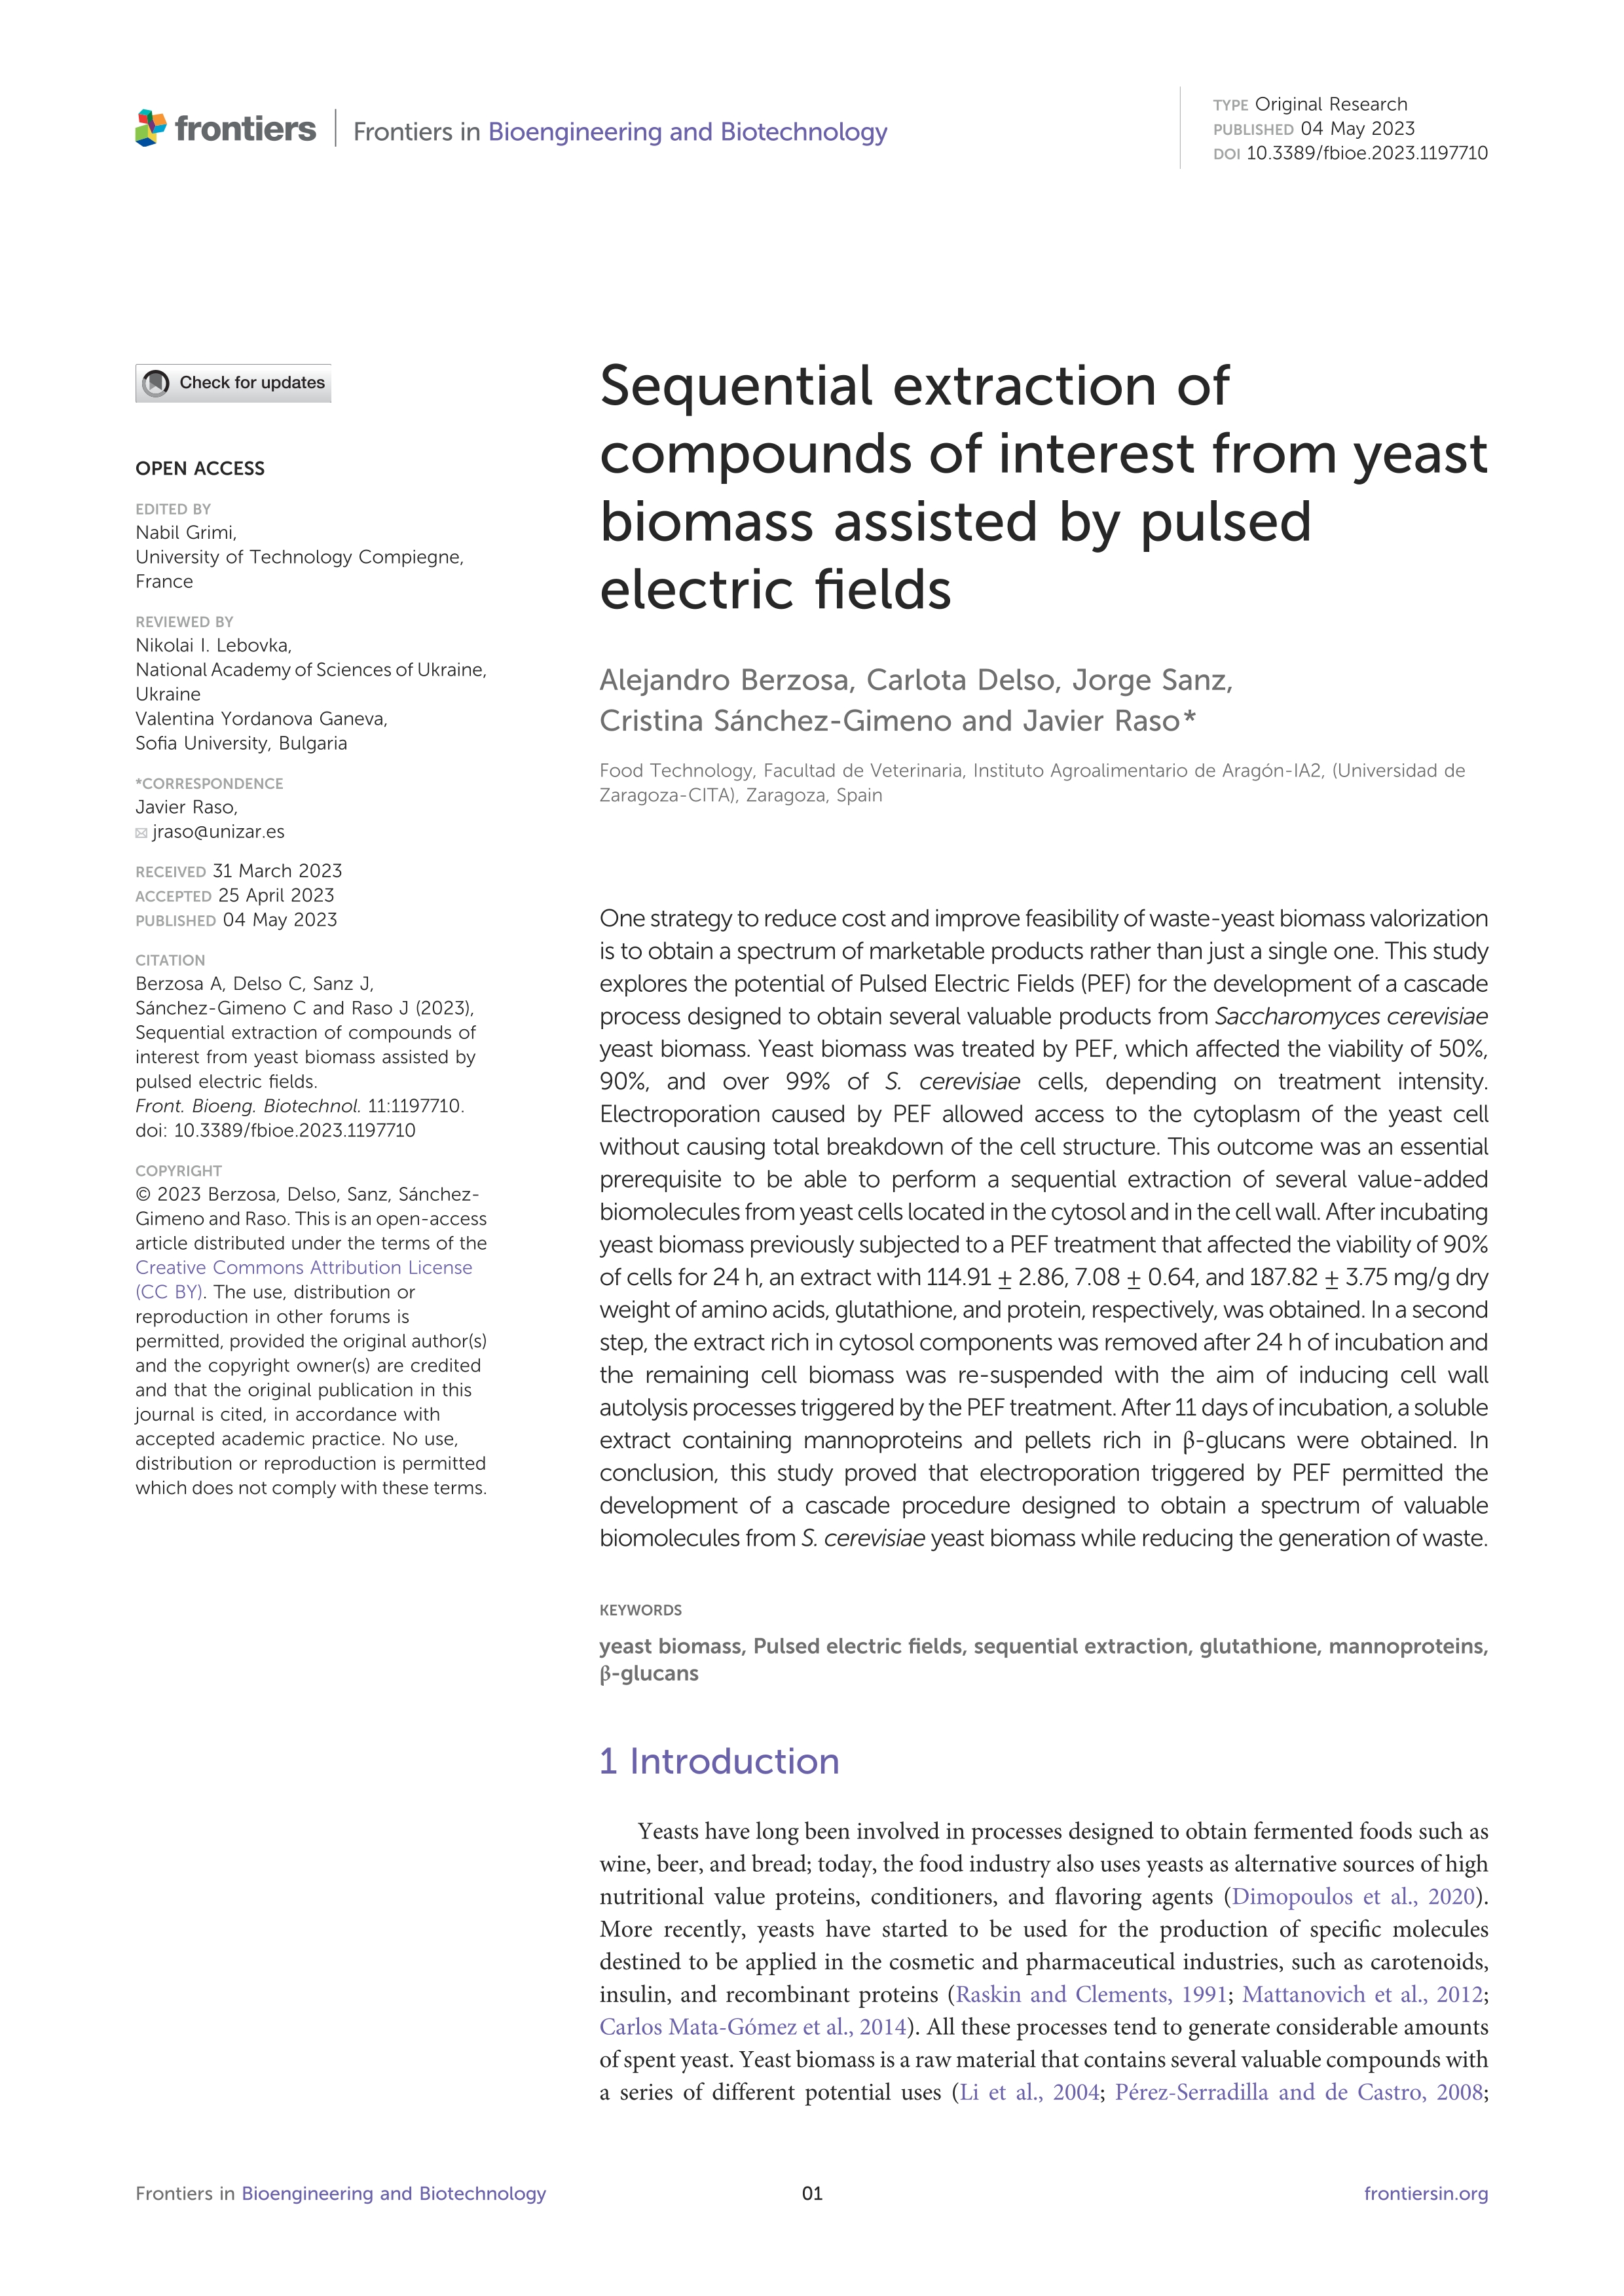 Sequential extraction of compounds of interest from yeast biomass assisted by pulsed electric fields